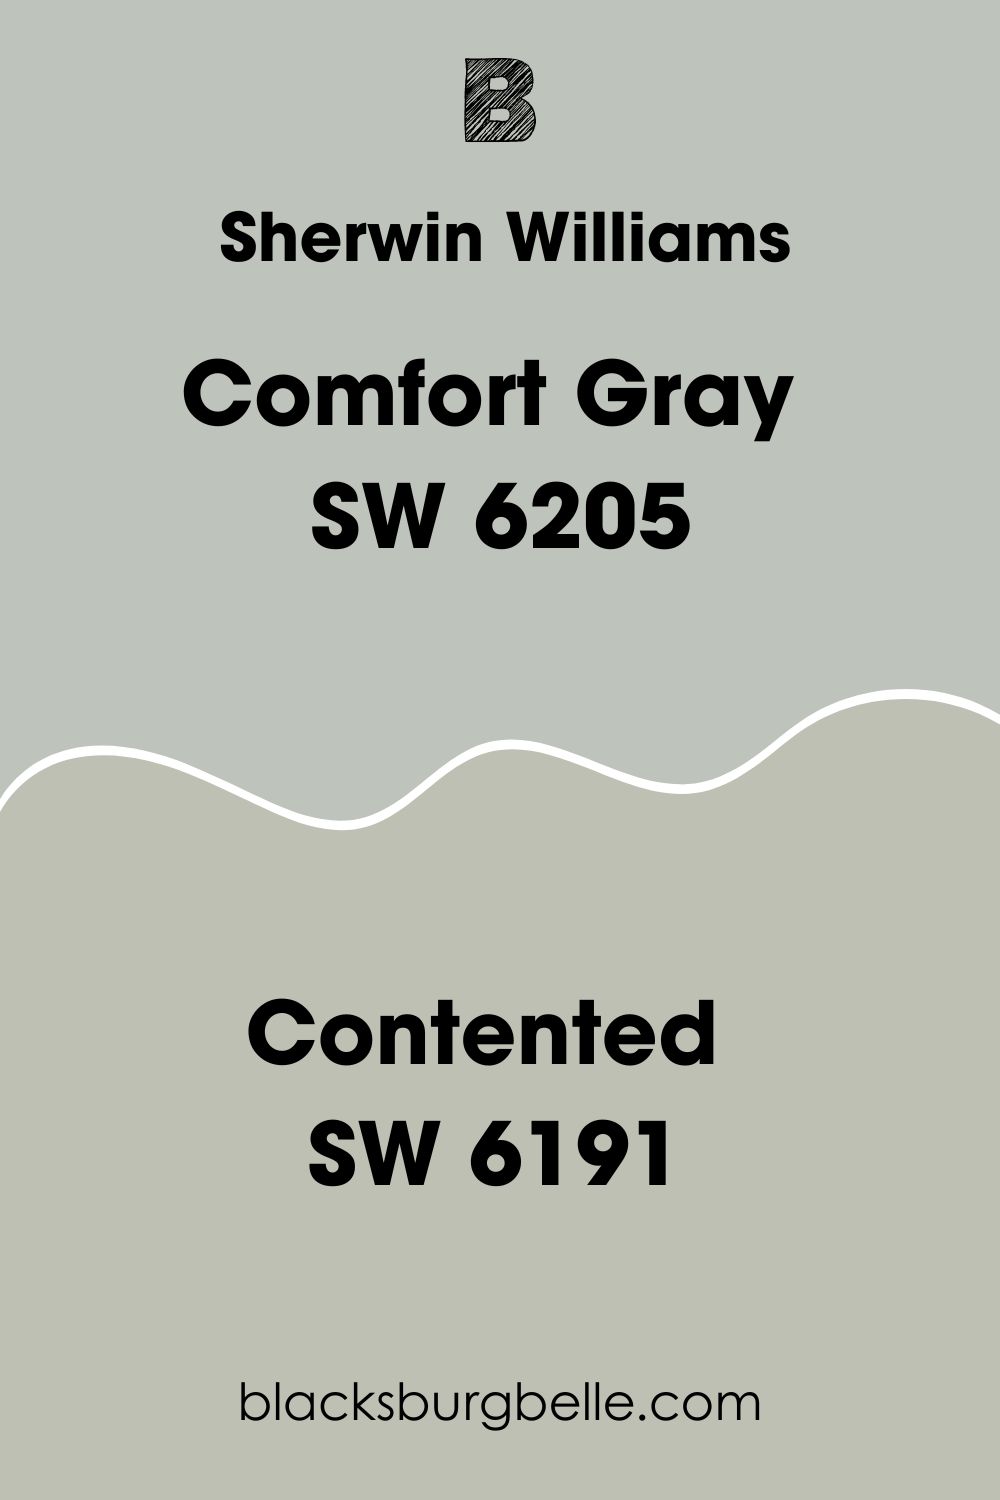 What’s the Difference Between Comfort Gray and Contented (SW 6191)